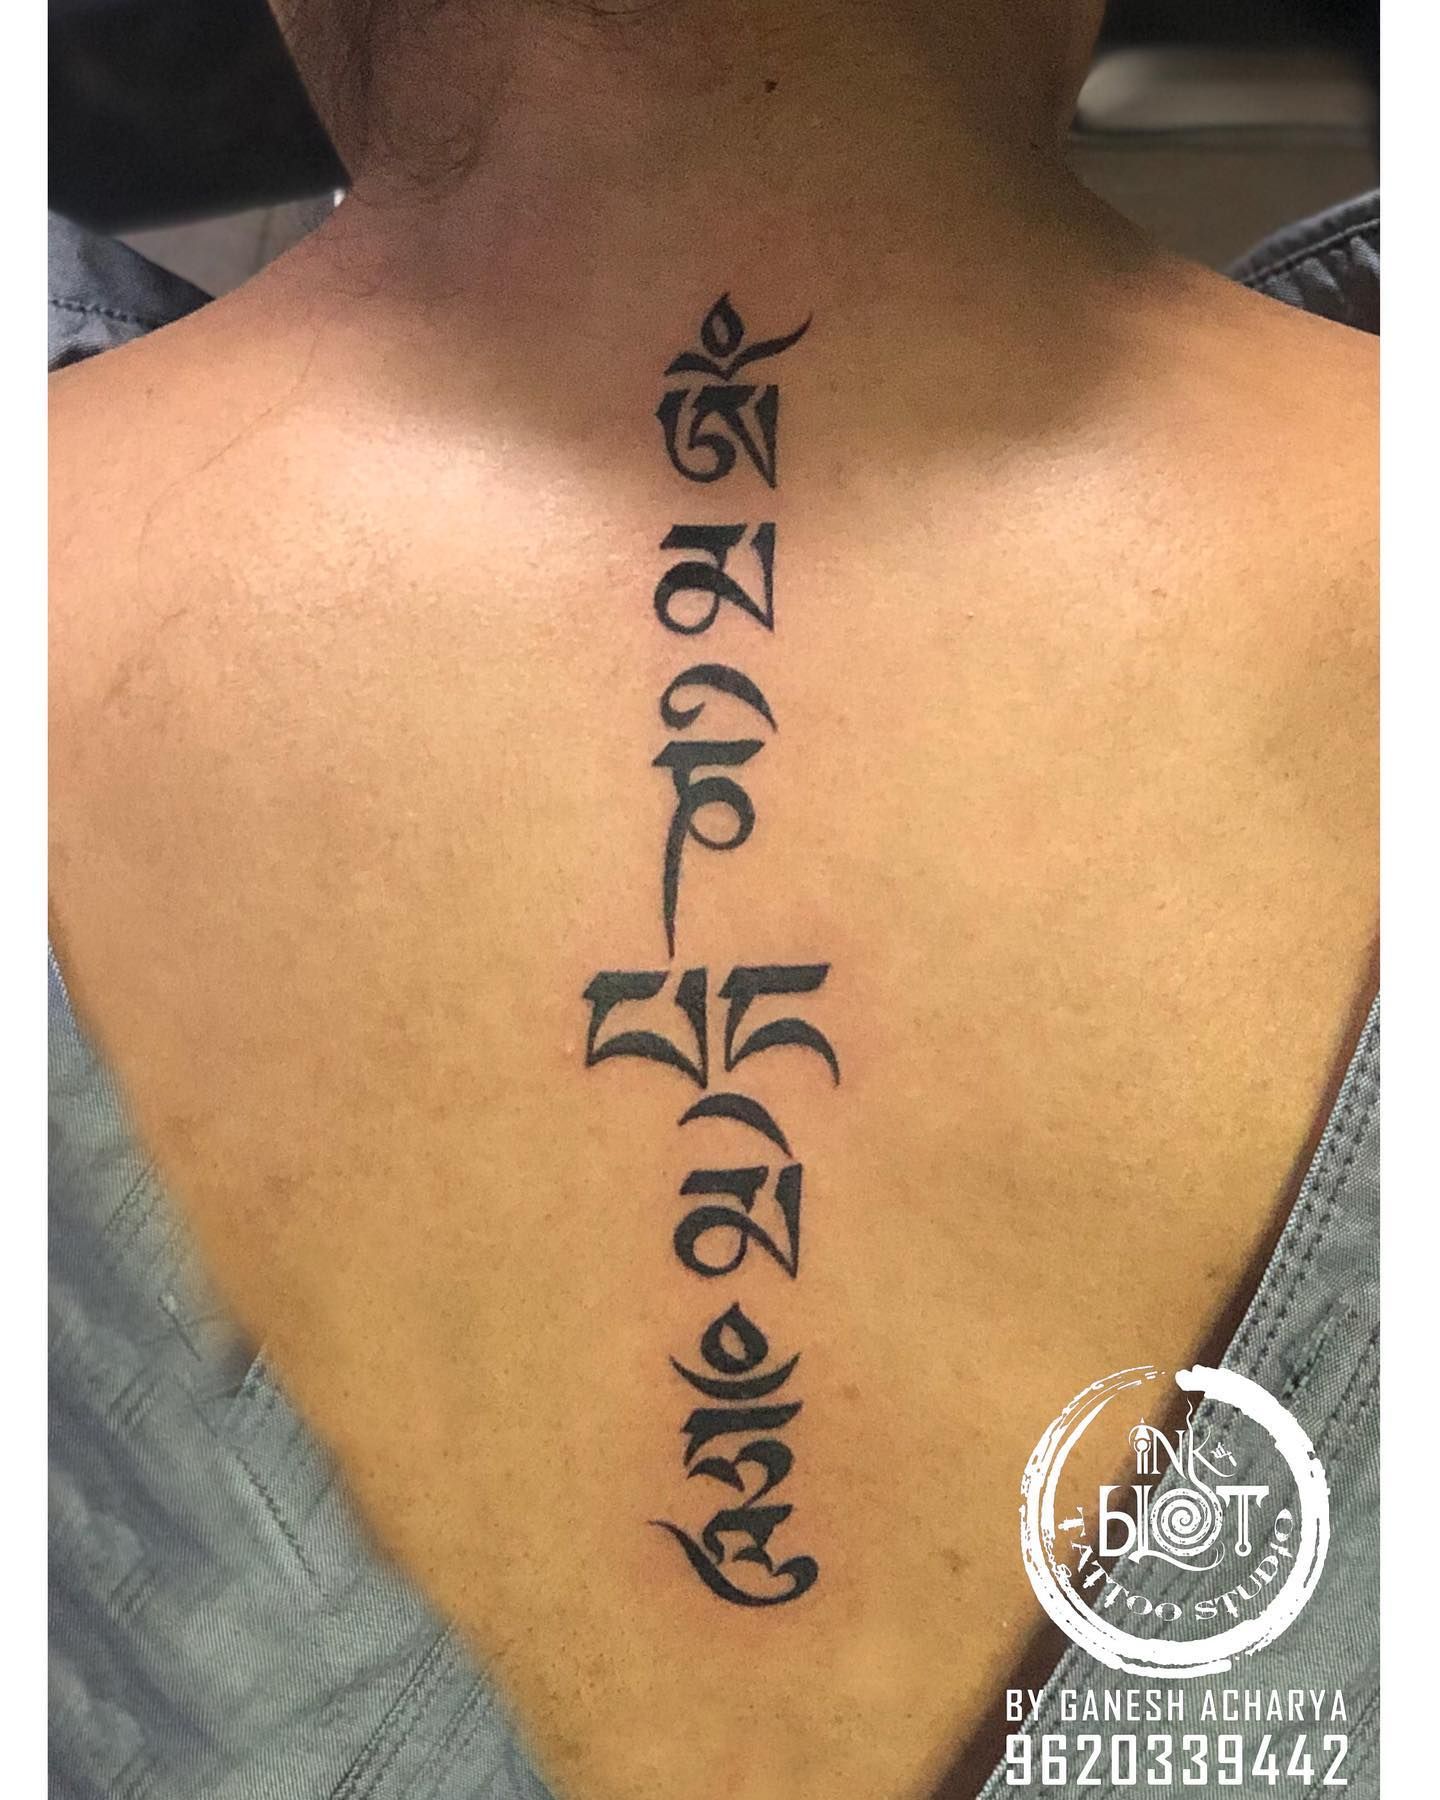 Brynjars artwork  Three things cannot be long hidden the sun the moon  and the truth       quotes spirituality tattooing buddha  buddhaquotes tattooed buddhas meditation love tattoooftheday 